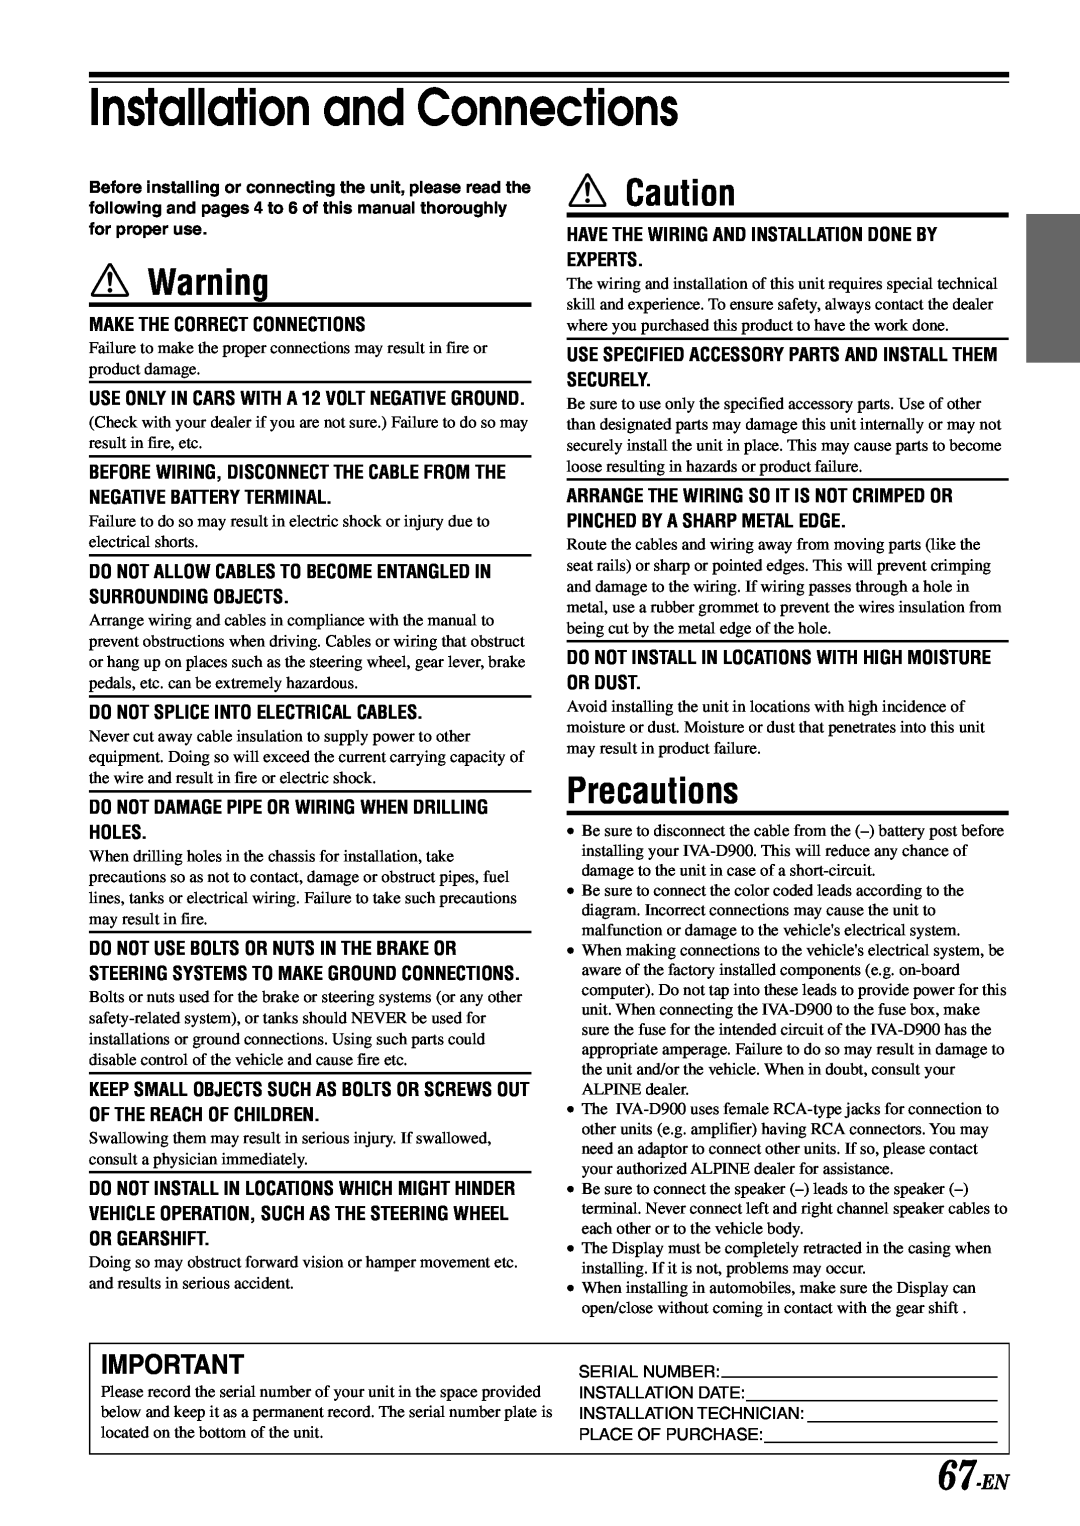 Alpine IVA-D900 owner manual Precautions, 67-EN, Installation and Connections 